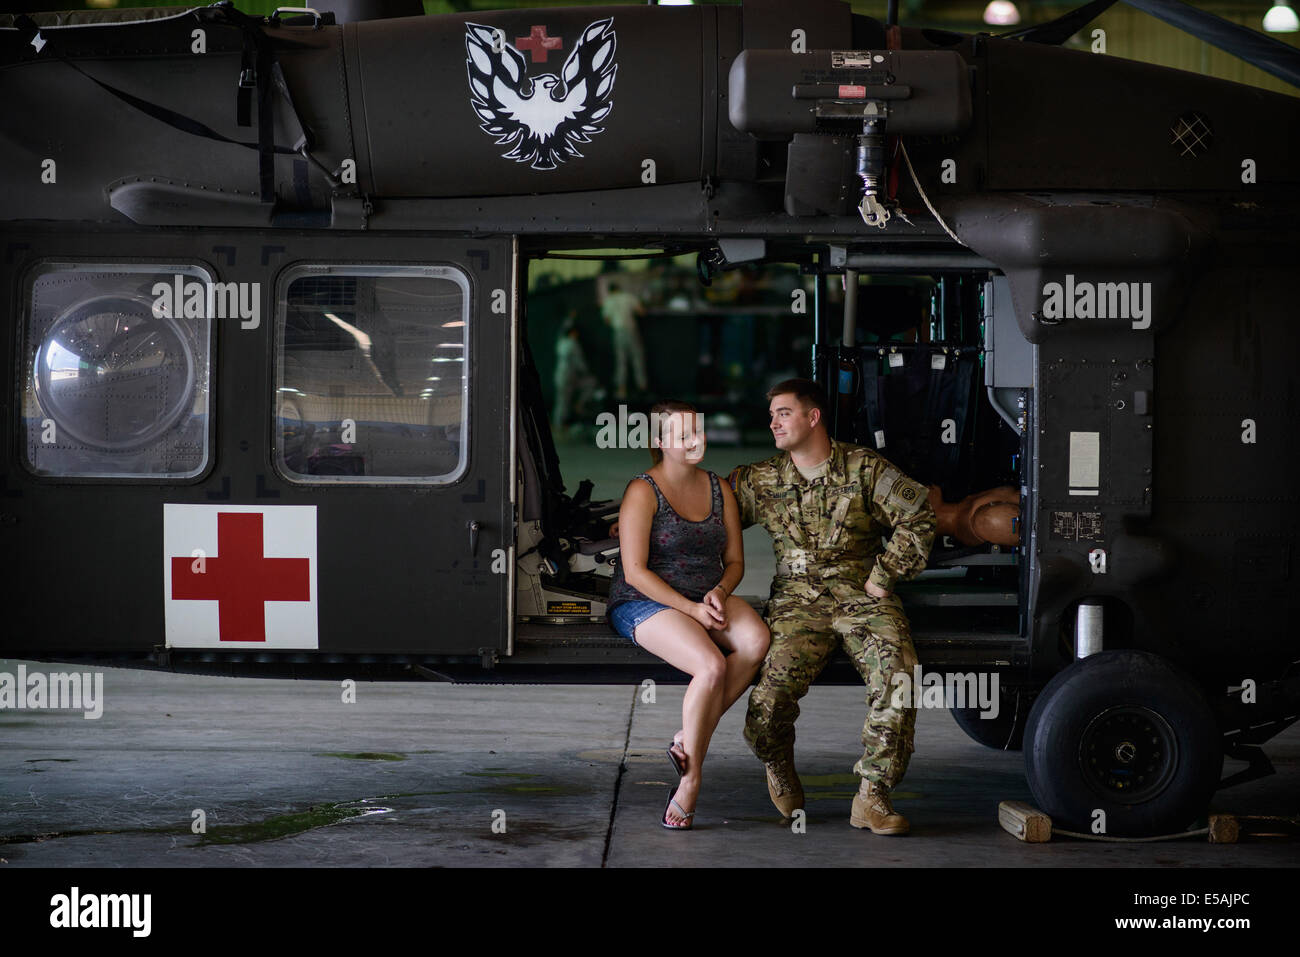 July 24, 2014 - Fort Bragg, NC, USA - July 24, 2014 - Fort Bragg, N.C., USA - Chief Warrant Officer Danny Miller spends some quiet time with his wife, Patti, Thursday, July 24, 2014, on Fort Bragg, N.C., before he and his fellow soldiers from Company C, 3rd General Support Aviation Battalion, 82nd Combat Aviation Brigade, deploy to Afghanistan for nine months. (Credit Image: © Andrew Craft/ZUMA Wire/ZUMAPRESS.com) Stock Photo